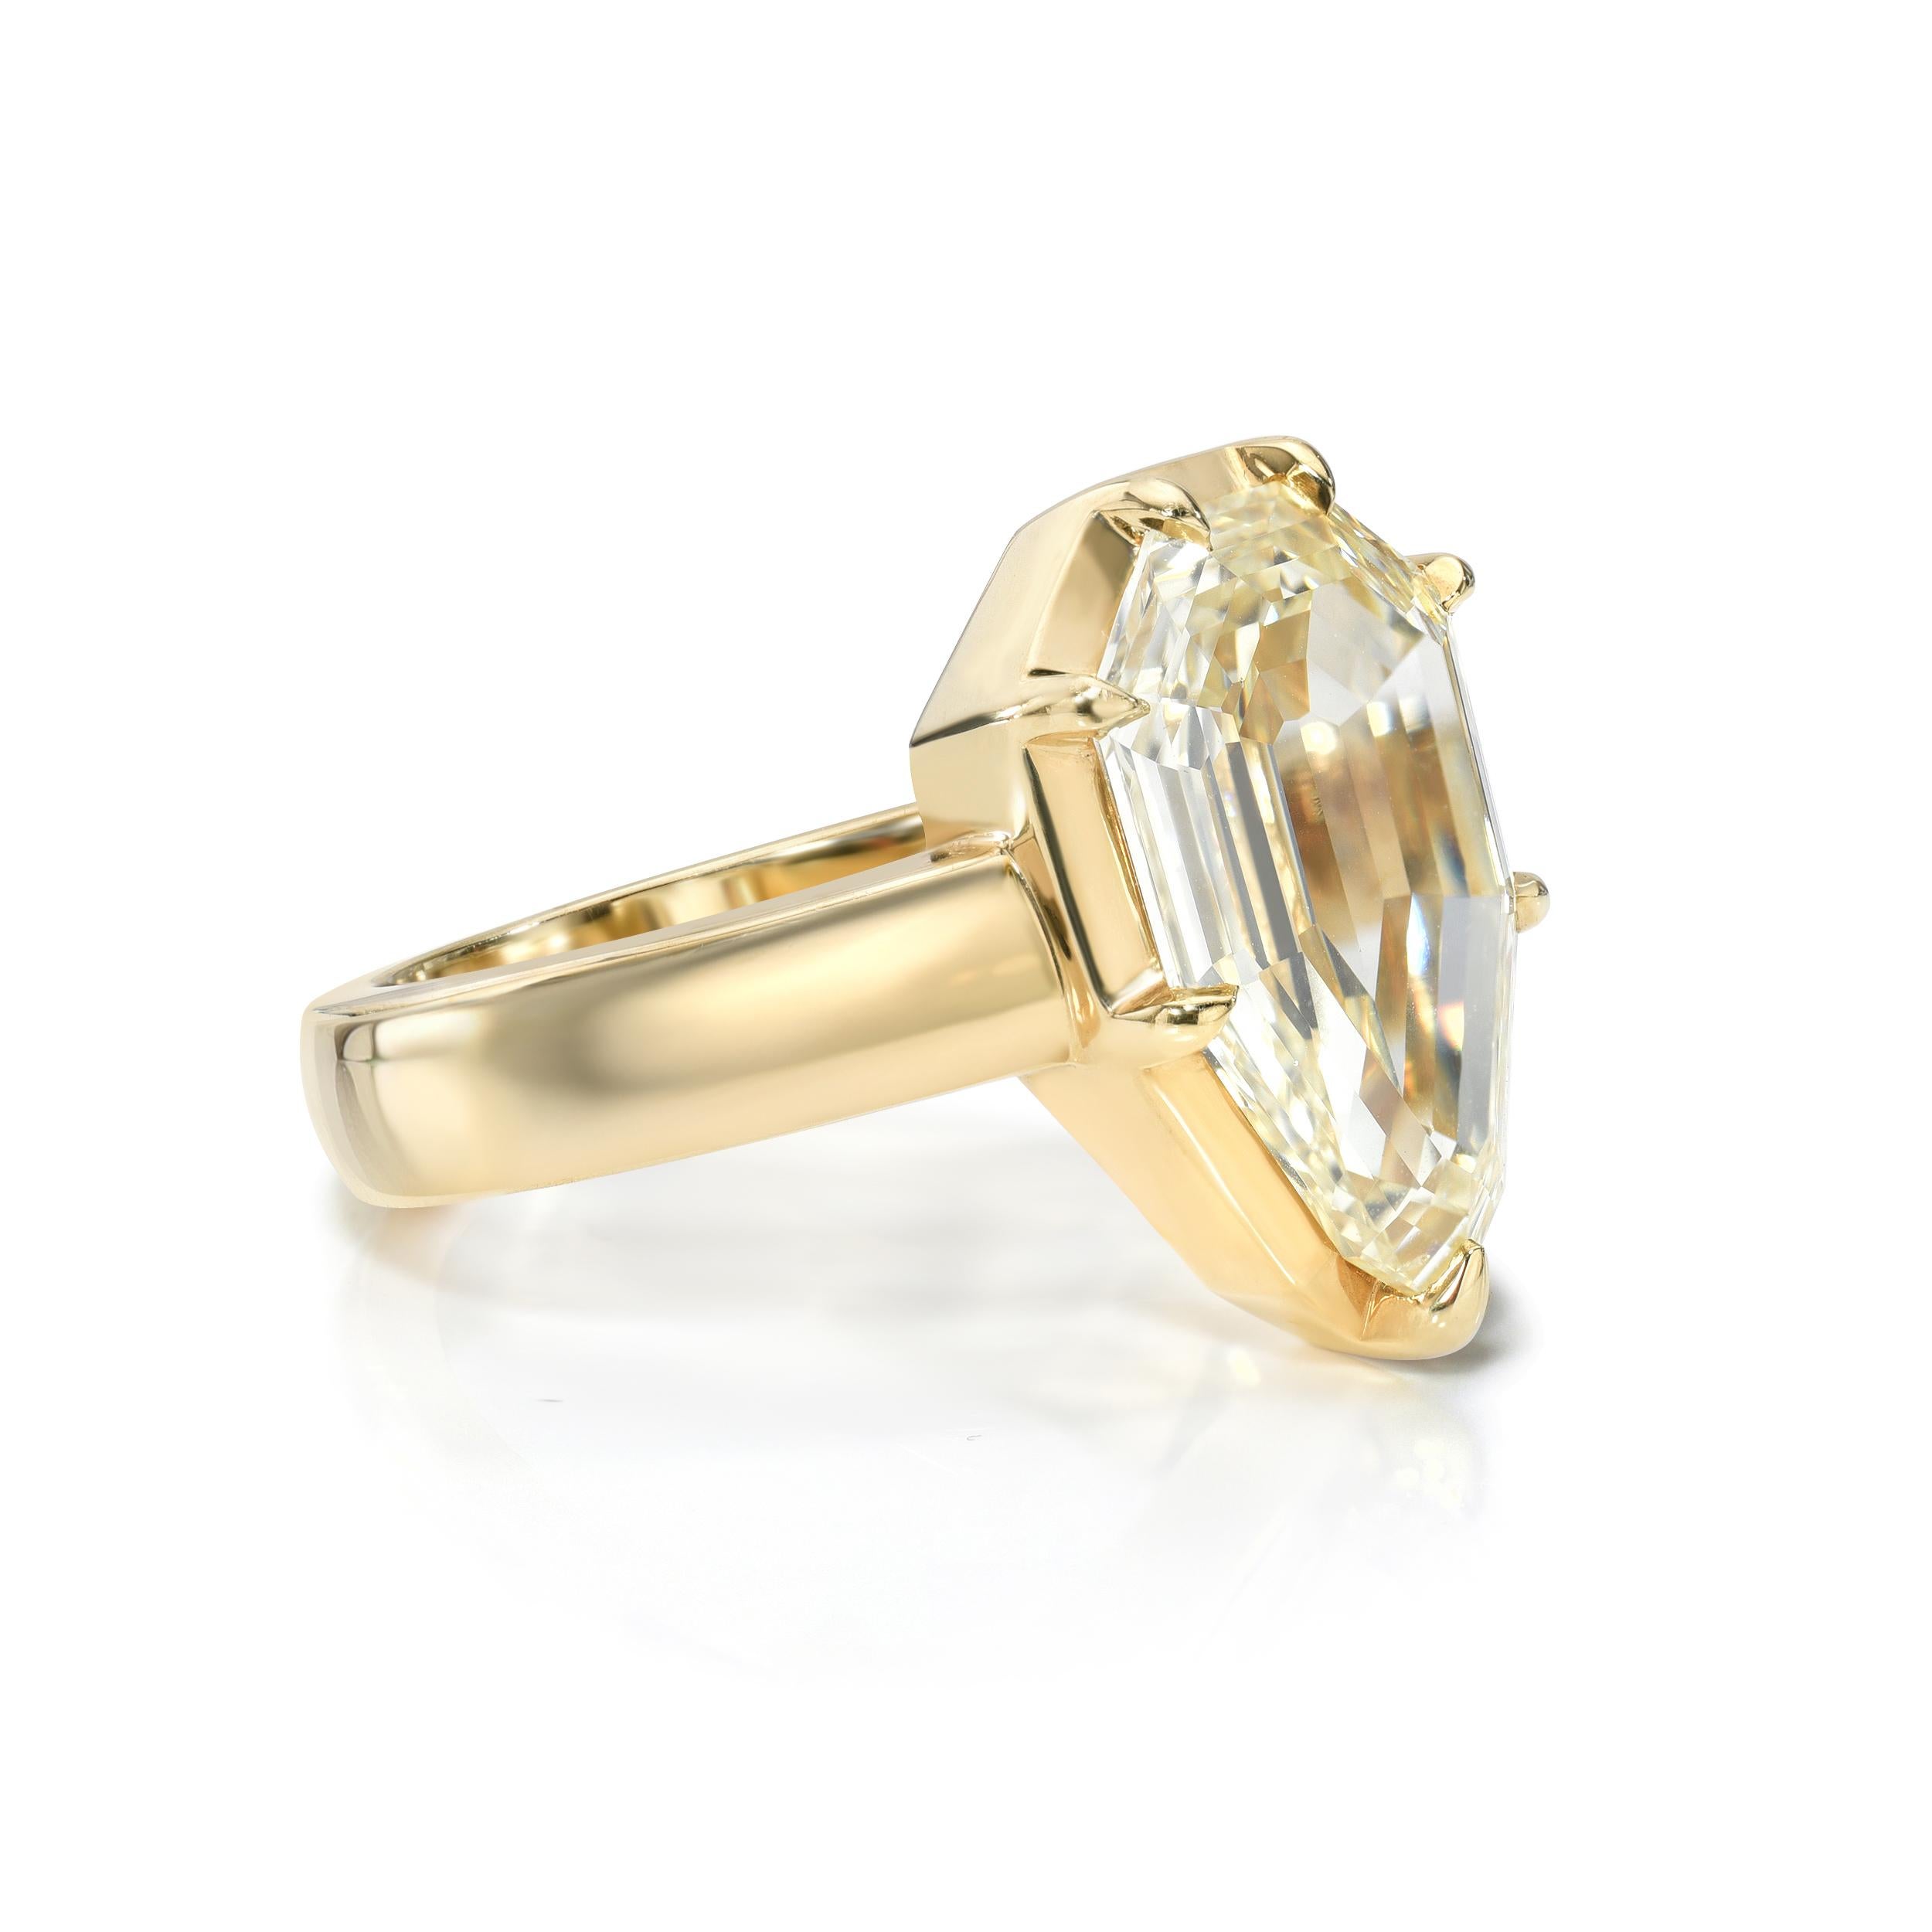 5.19ct Y-Z/SI1 GIA certified modified pear step cut diamond prong set in a handcrafted 18K yellow gold mounting.